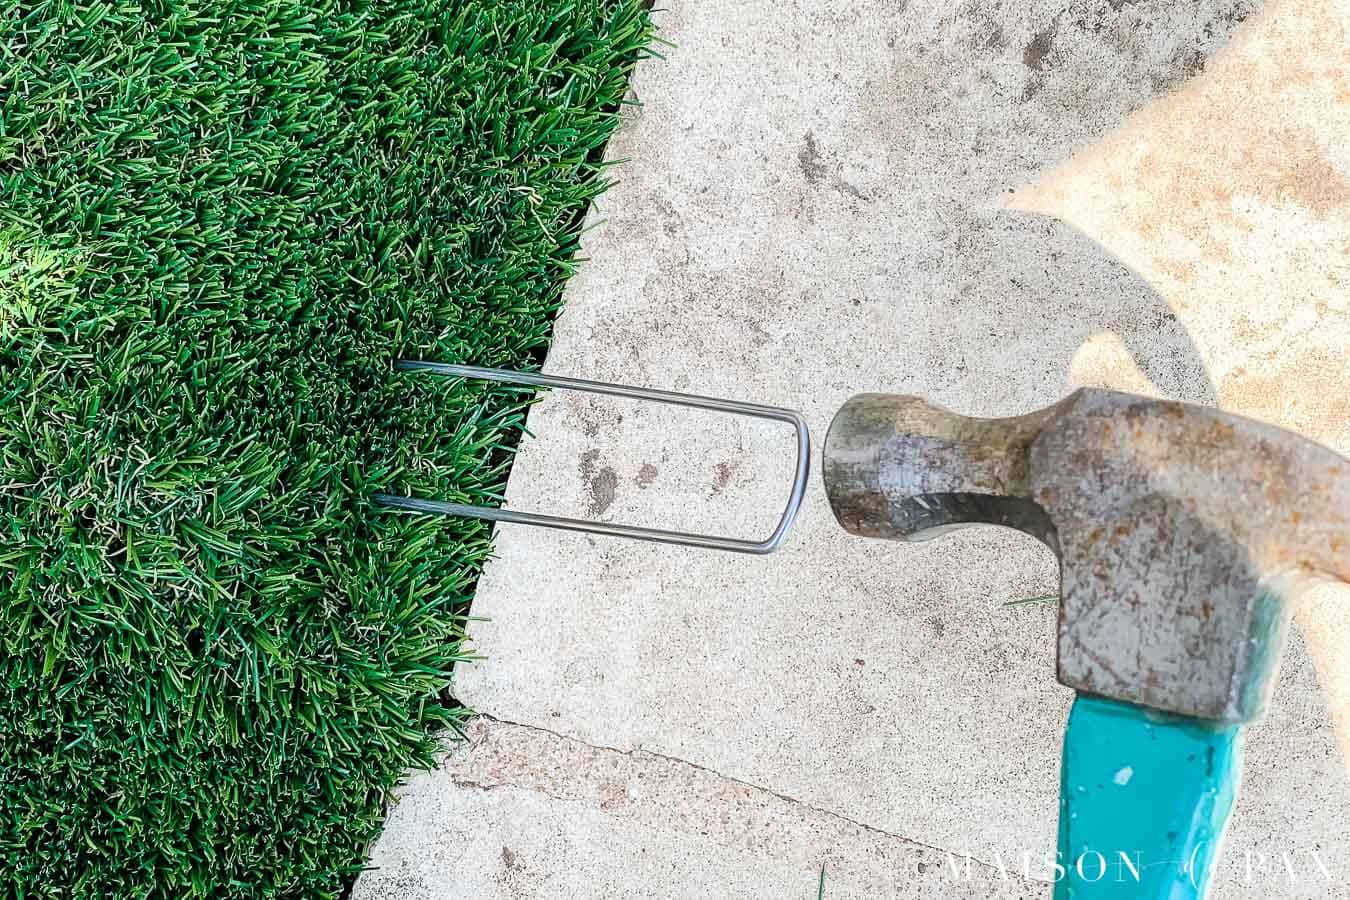 hammer landscape staple in for artificial turf